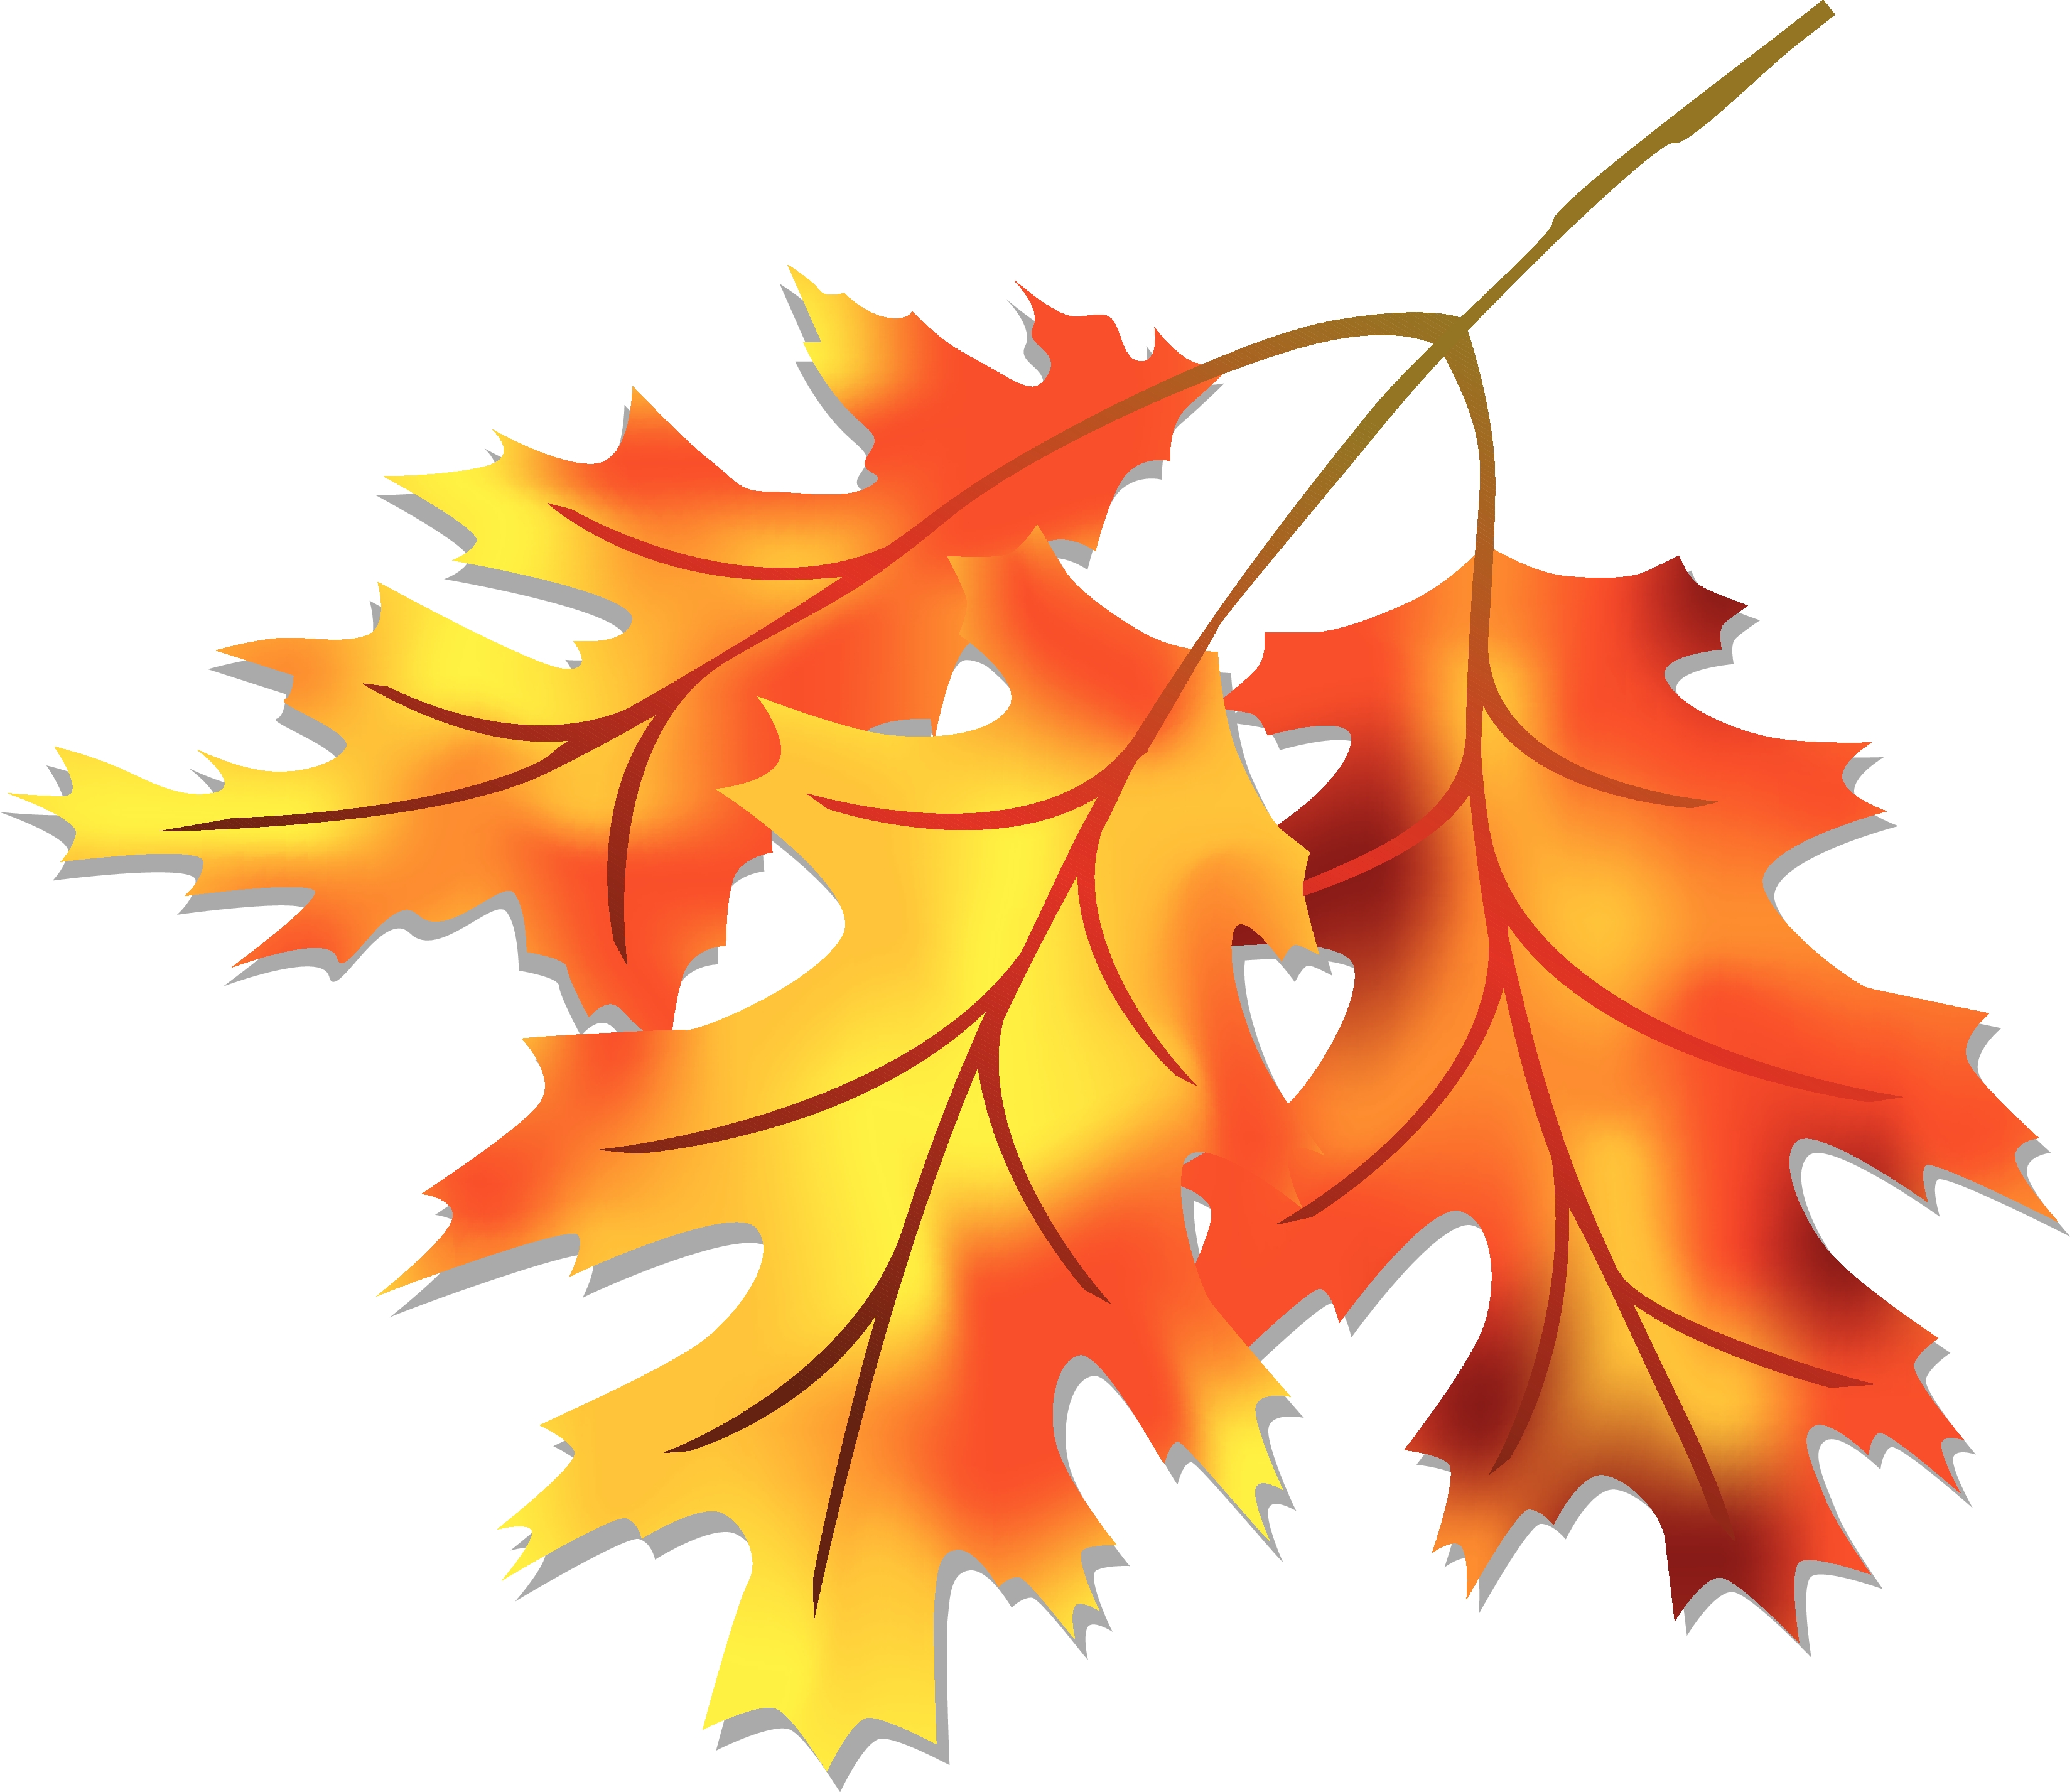 Fall leaves tree with autumn leaves illustrationlor clip art 3 